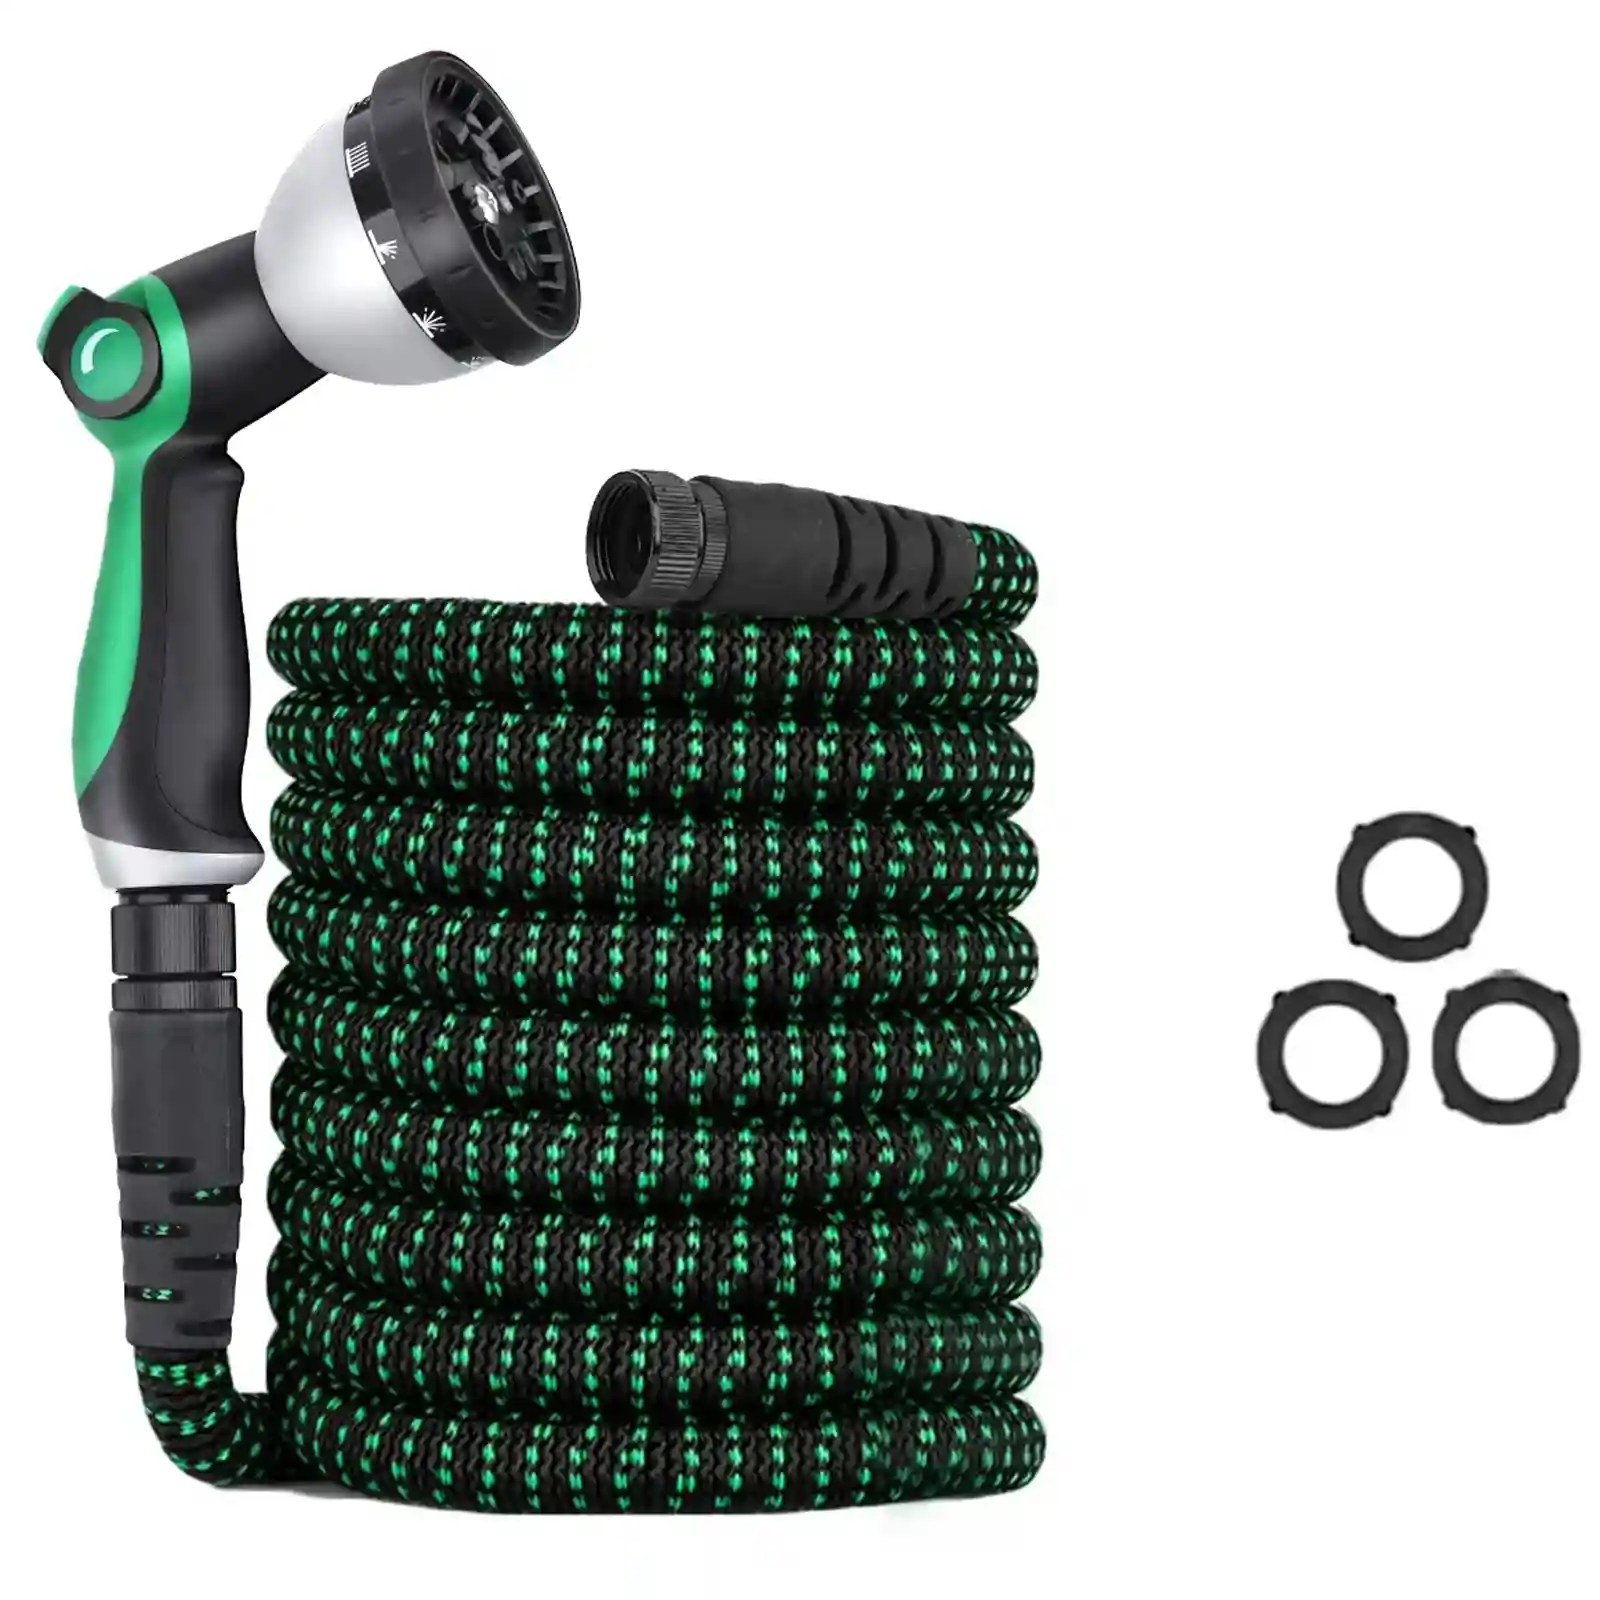 EVEAGE 100ft Flexible Garden Hose with Triple Layer Latex Core